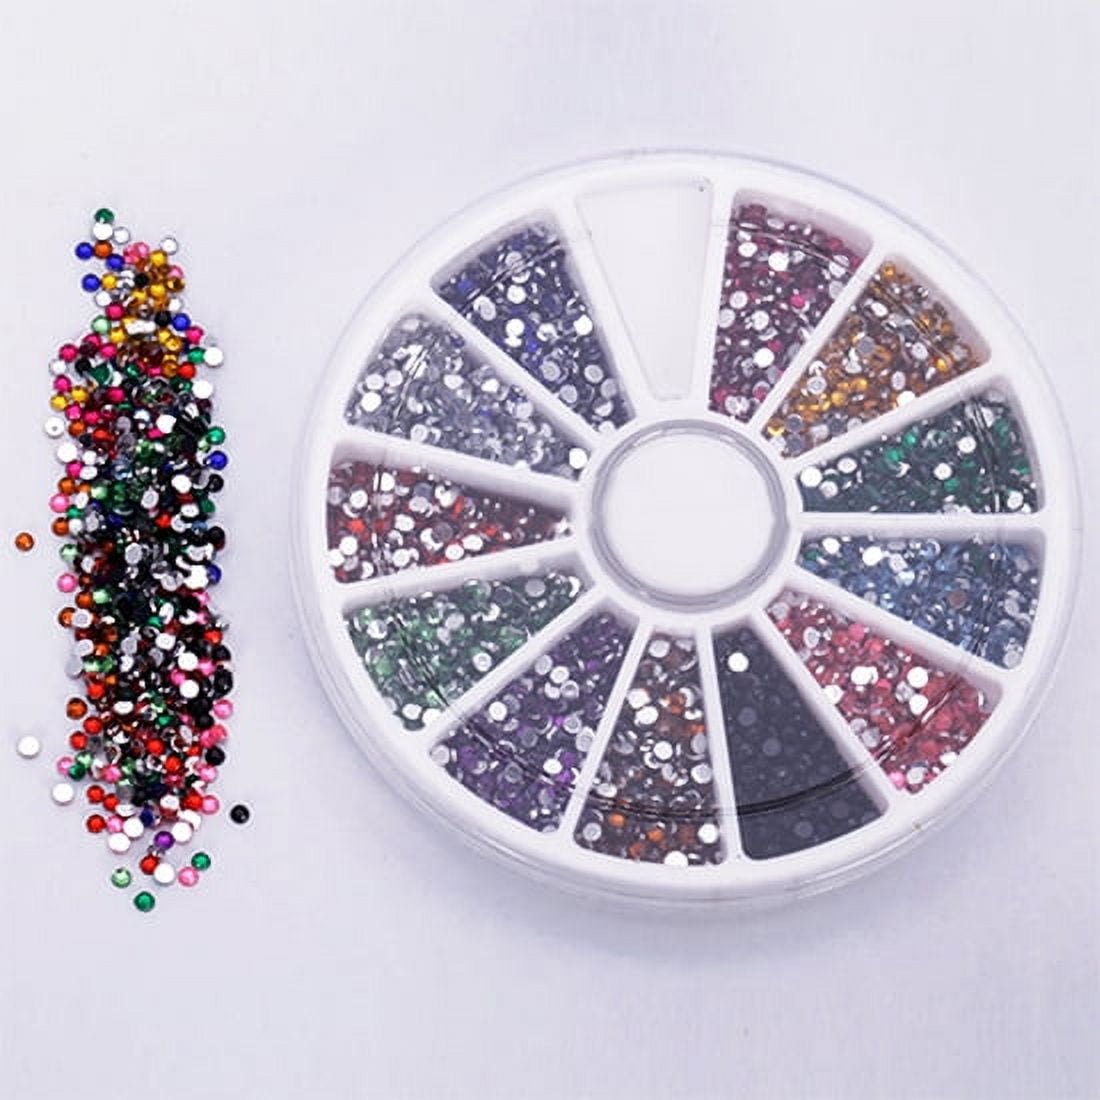 500pcs About 3/4/5mm Real White Flat Back Rhinestones For Crafts, Shoes,  Nail Art Decoration